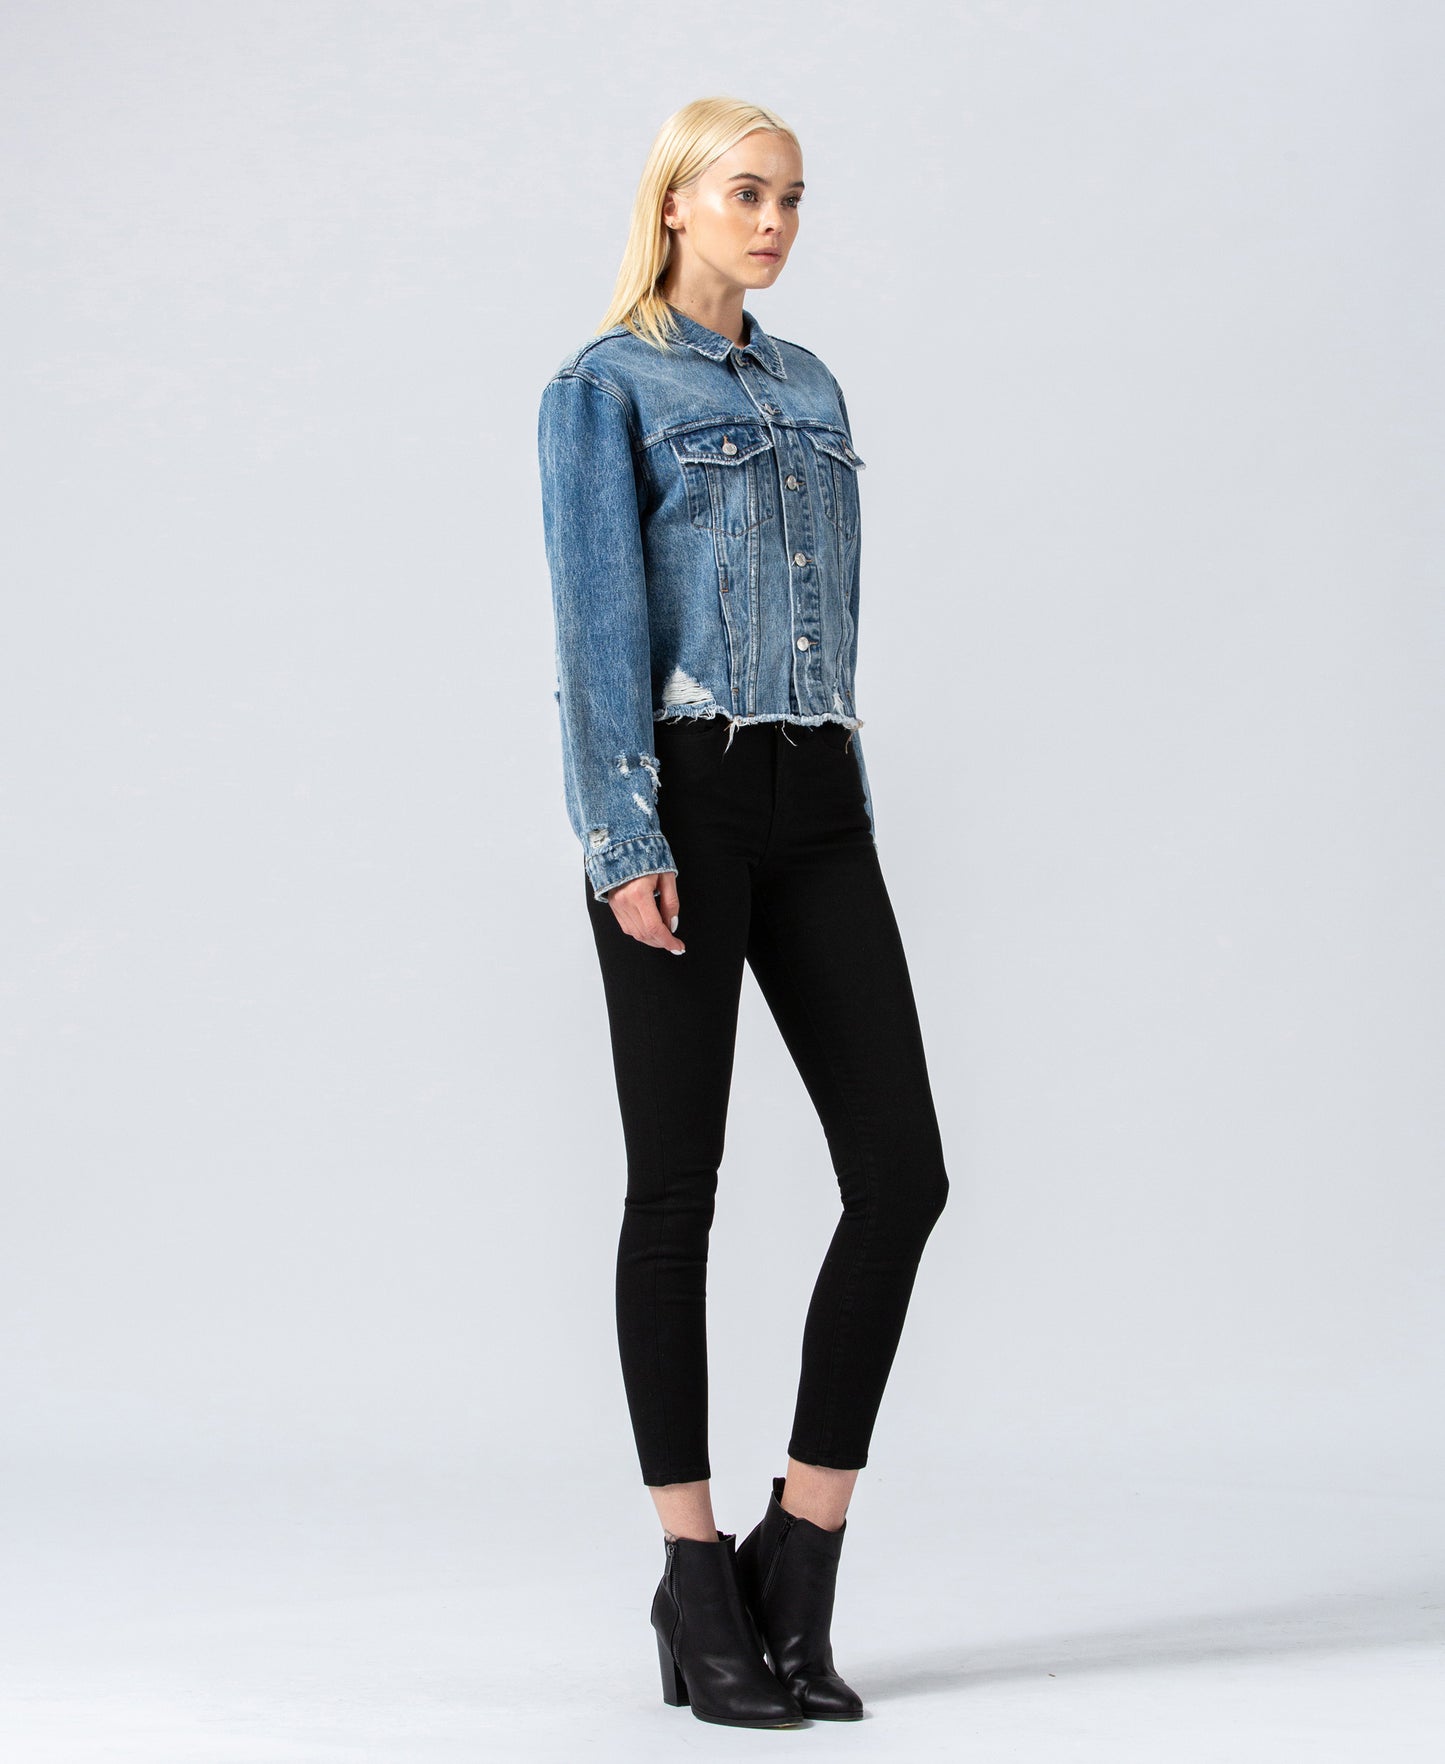 Leah Classic Denim Jacket with Raw Hem - Wild Luxe Boutique